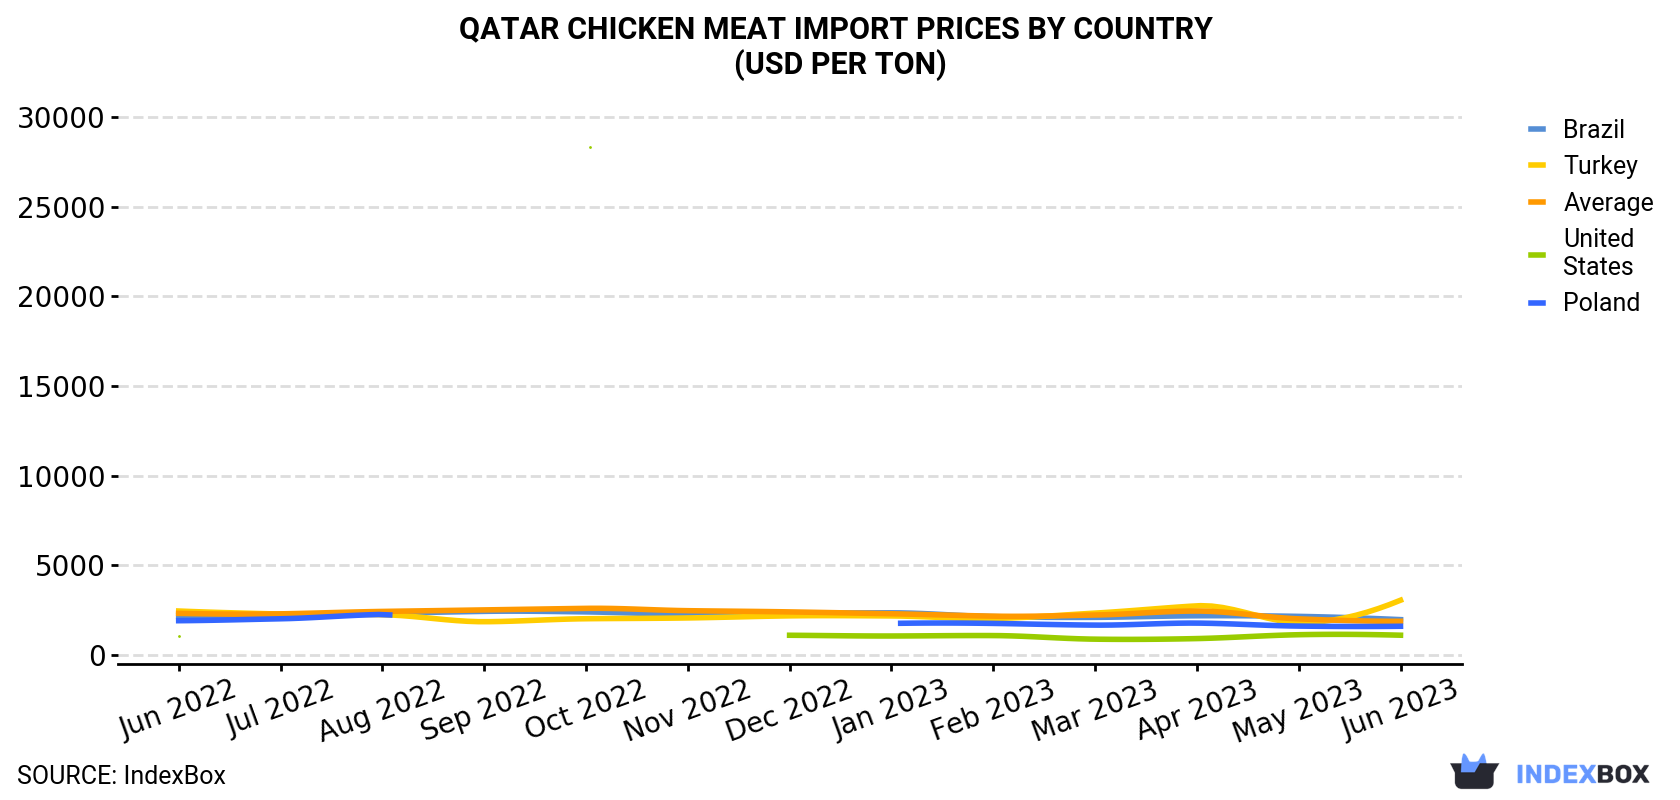 Qatar Chicken Meat Import Prices By Country (USD Per Ton)